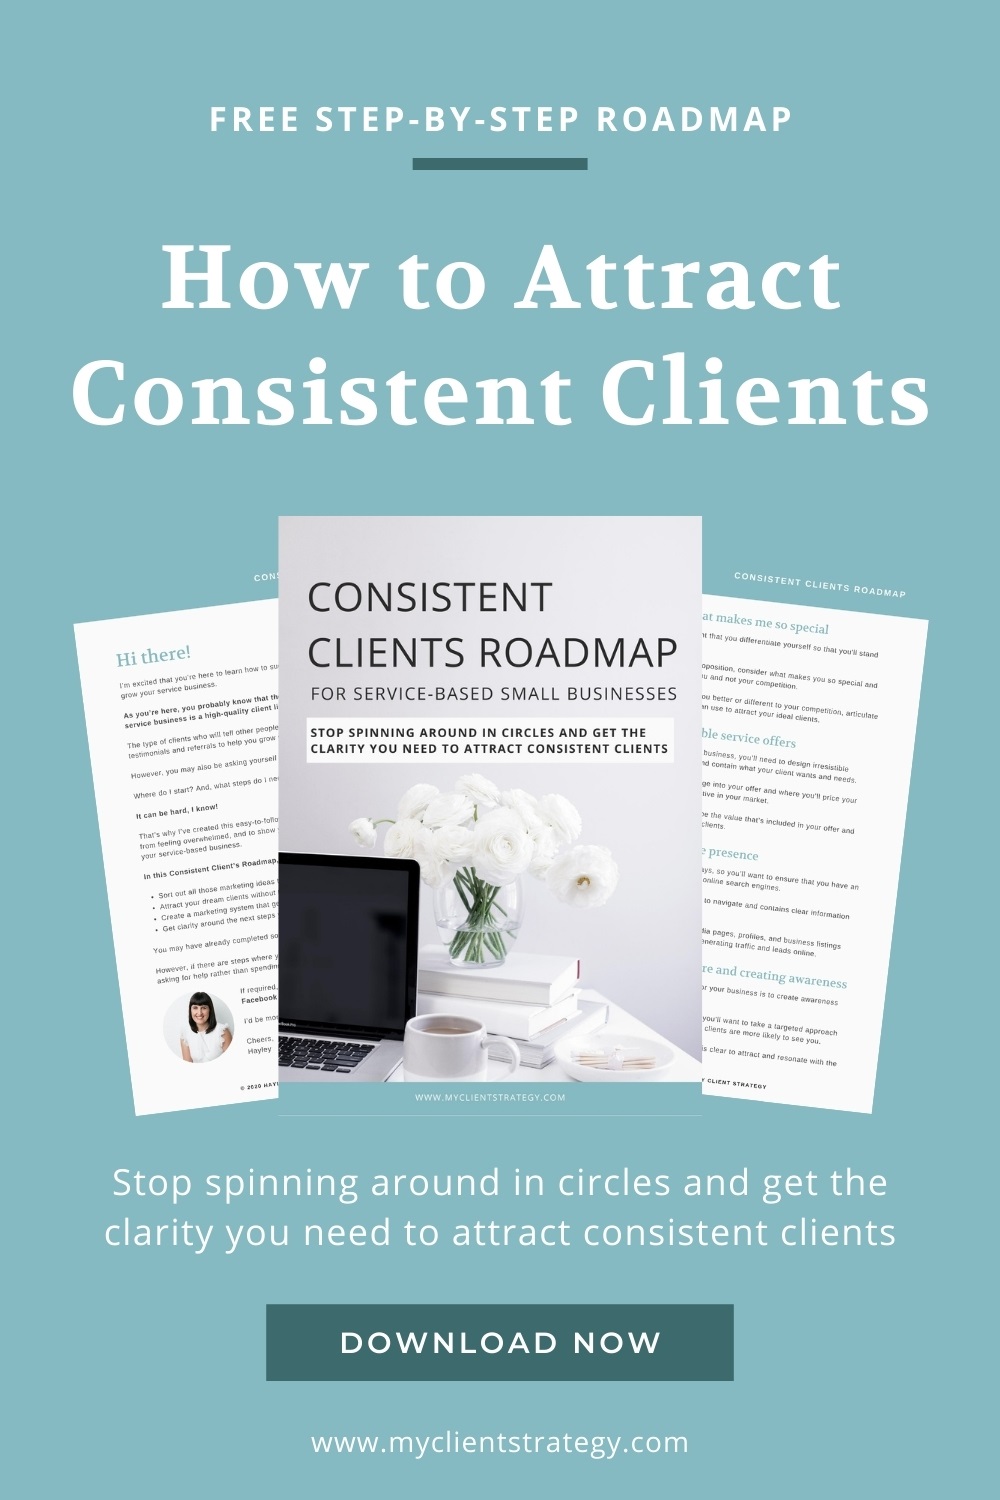 How to Attract Consistent Clients Free Roadmap